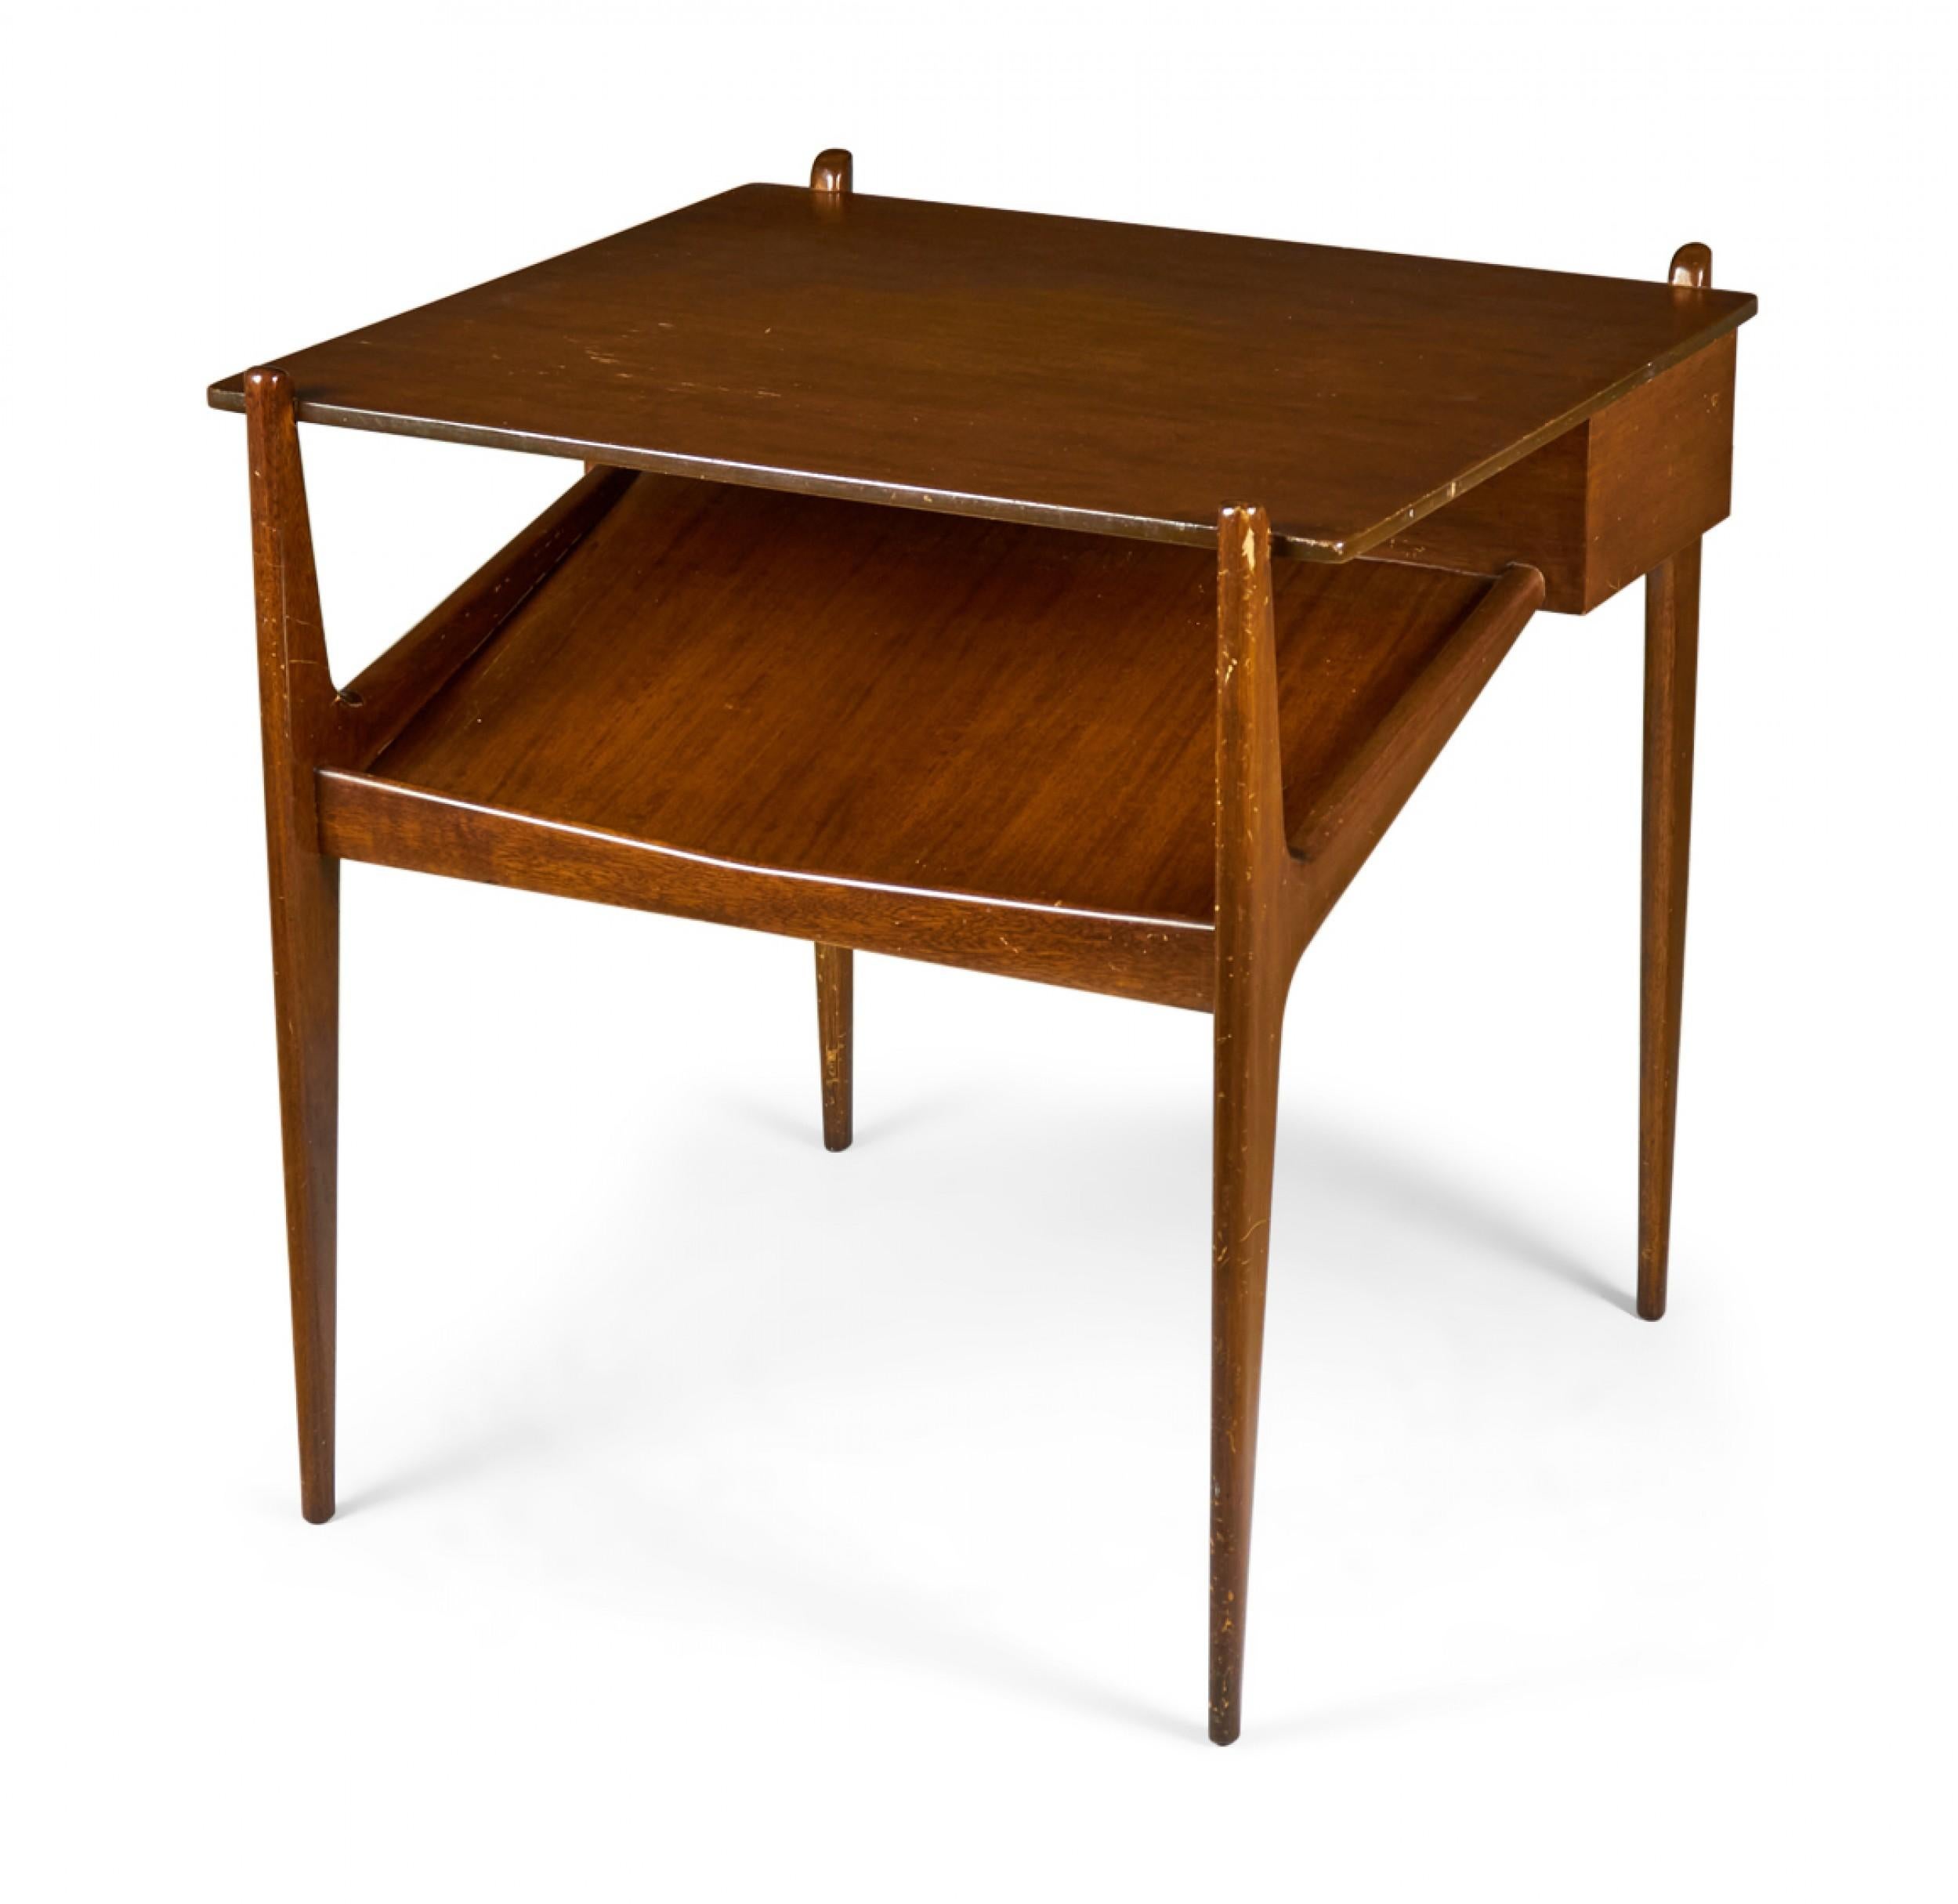 PAIR of American Mid-Century walnut end / side tables with a square top and magazine shelf attached to the top at an acute angle framed by four tapered walnut legs. (SINGER & SONS)(PRICED AS PAIR)
